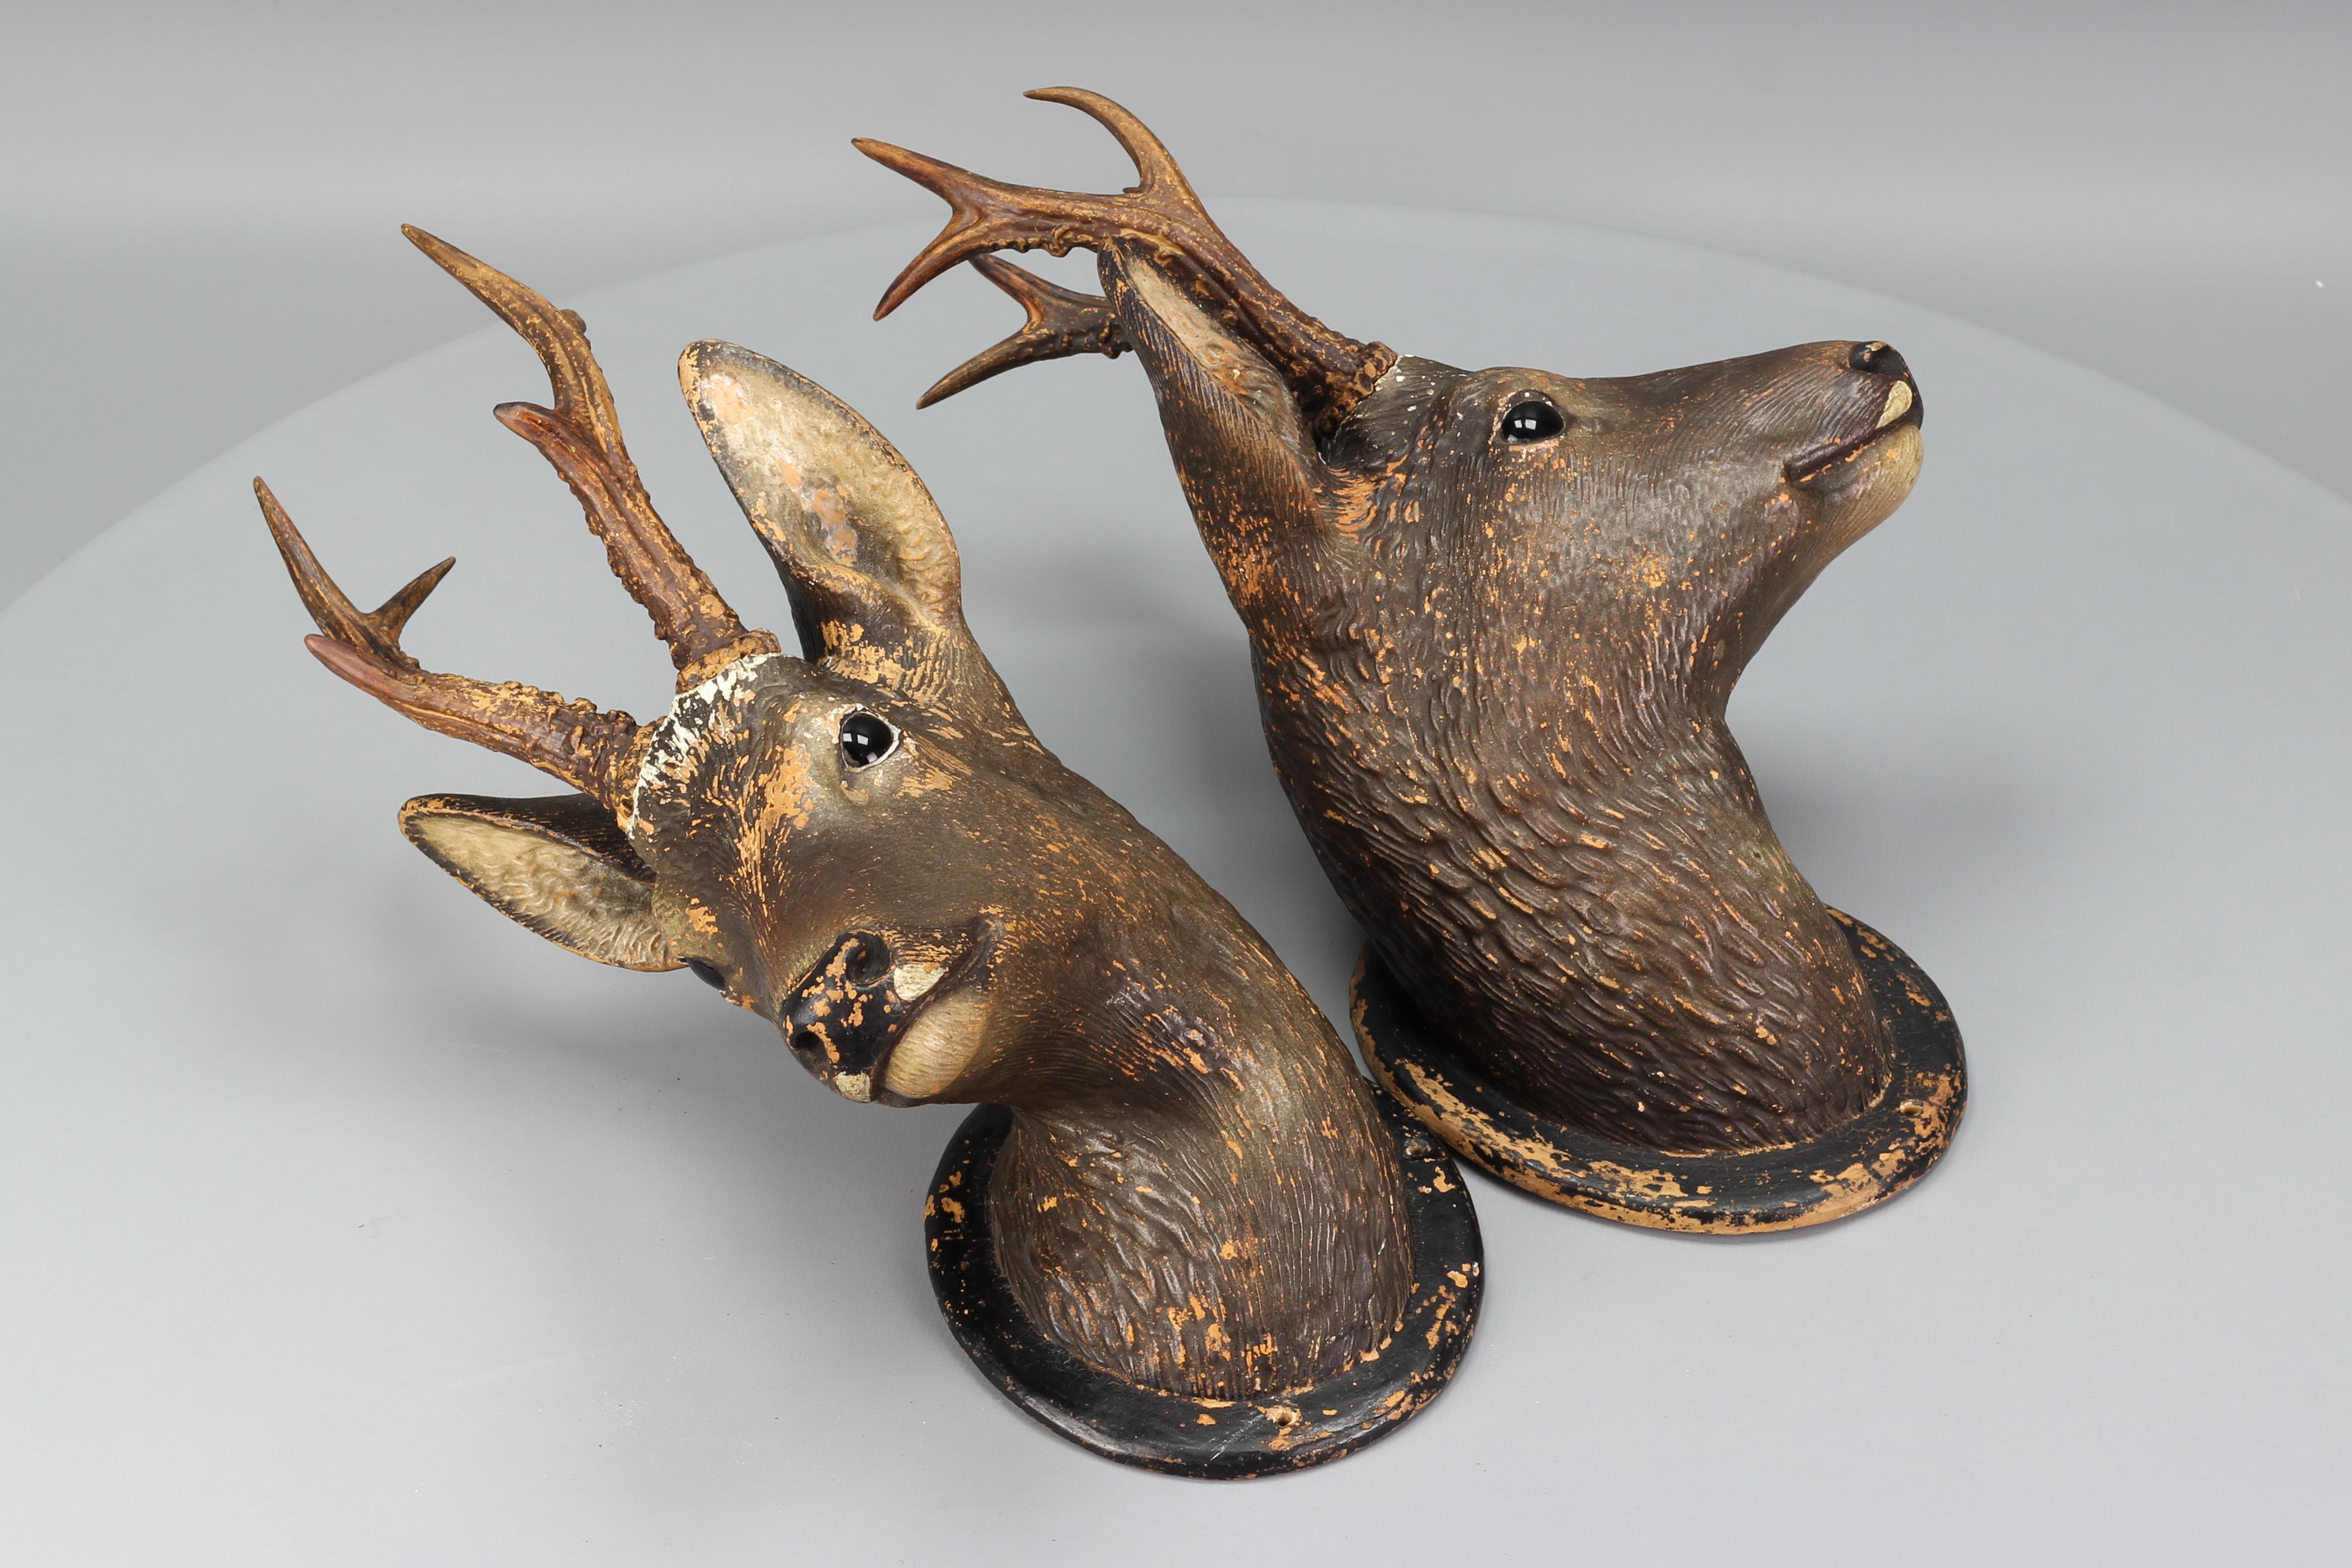 Ceramic Roe Deer Heads, wall decoration, Germany, 1930s, Set of Two.
An absolutely adorable pair of roe deer heads in the Black Forest style is made entirely of ceramic and hand-painted in brown and black colors. The antlers of both deer heads are